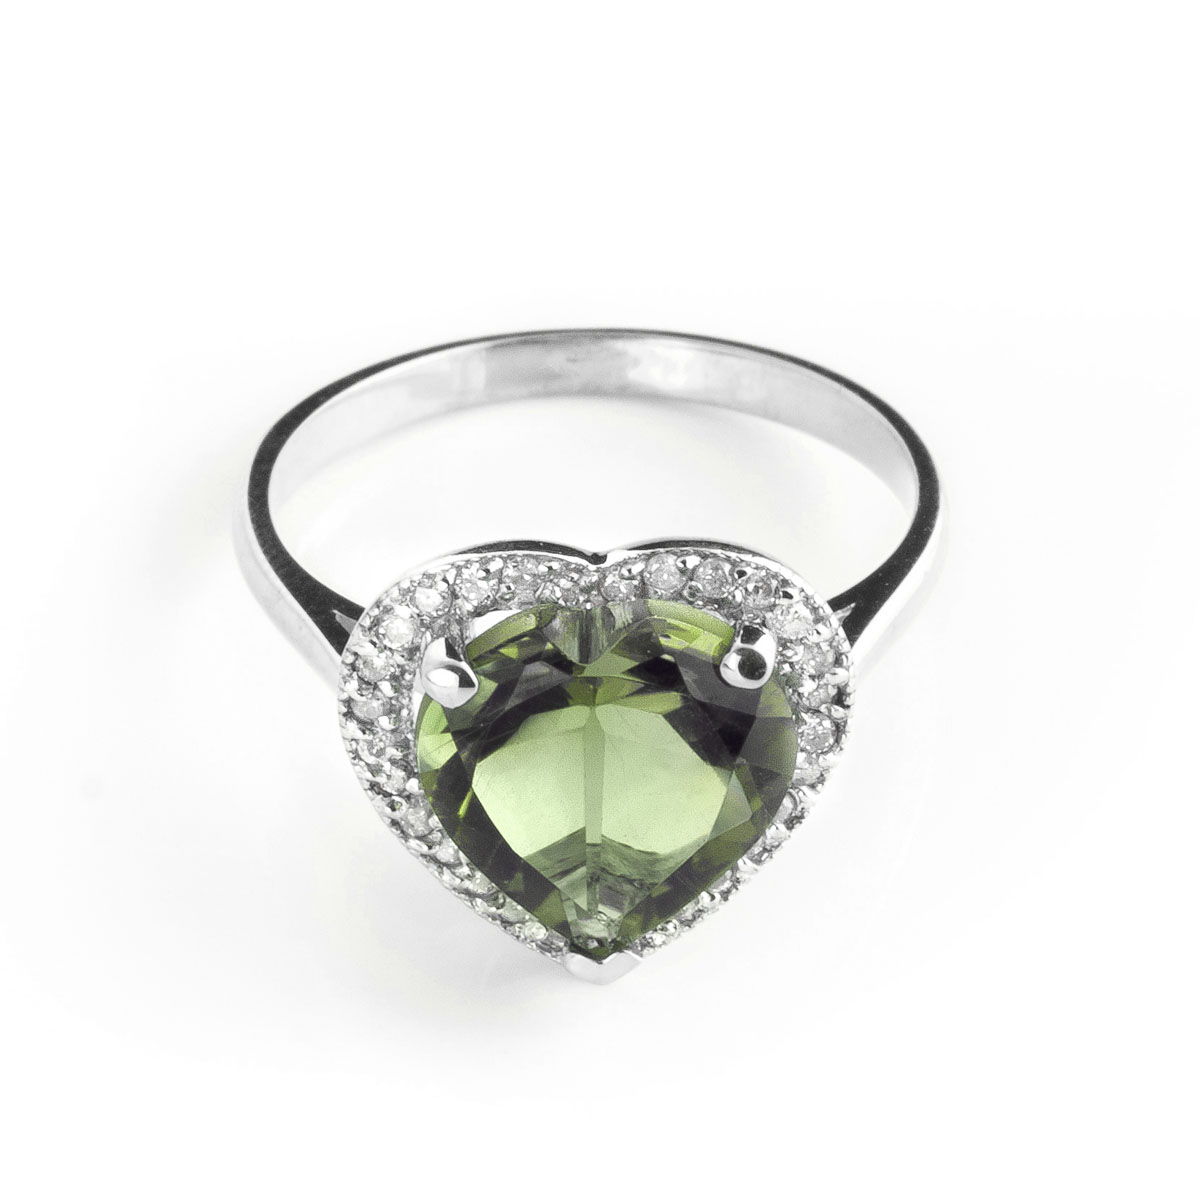 Green Amethyst Halo Ring 3.24 ctw in 18ct White Gold